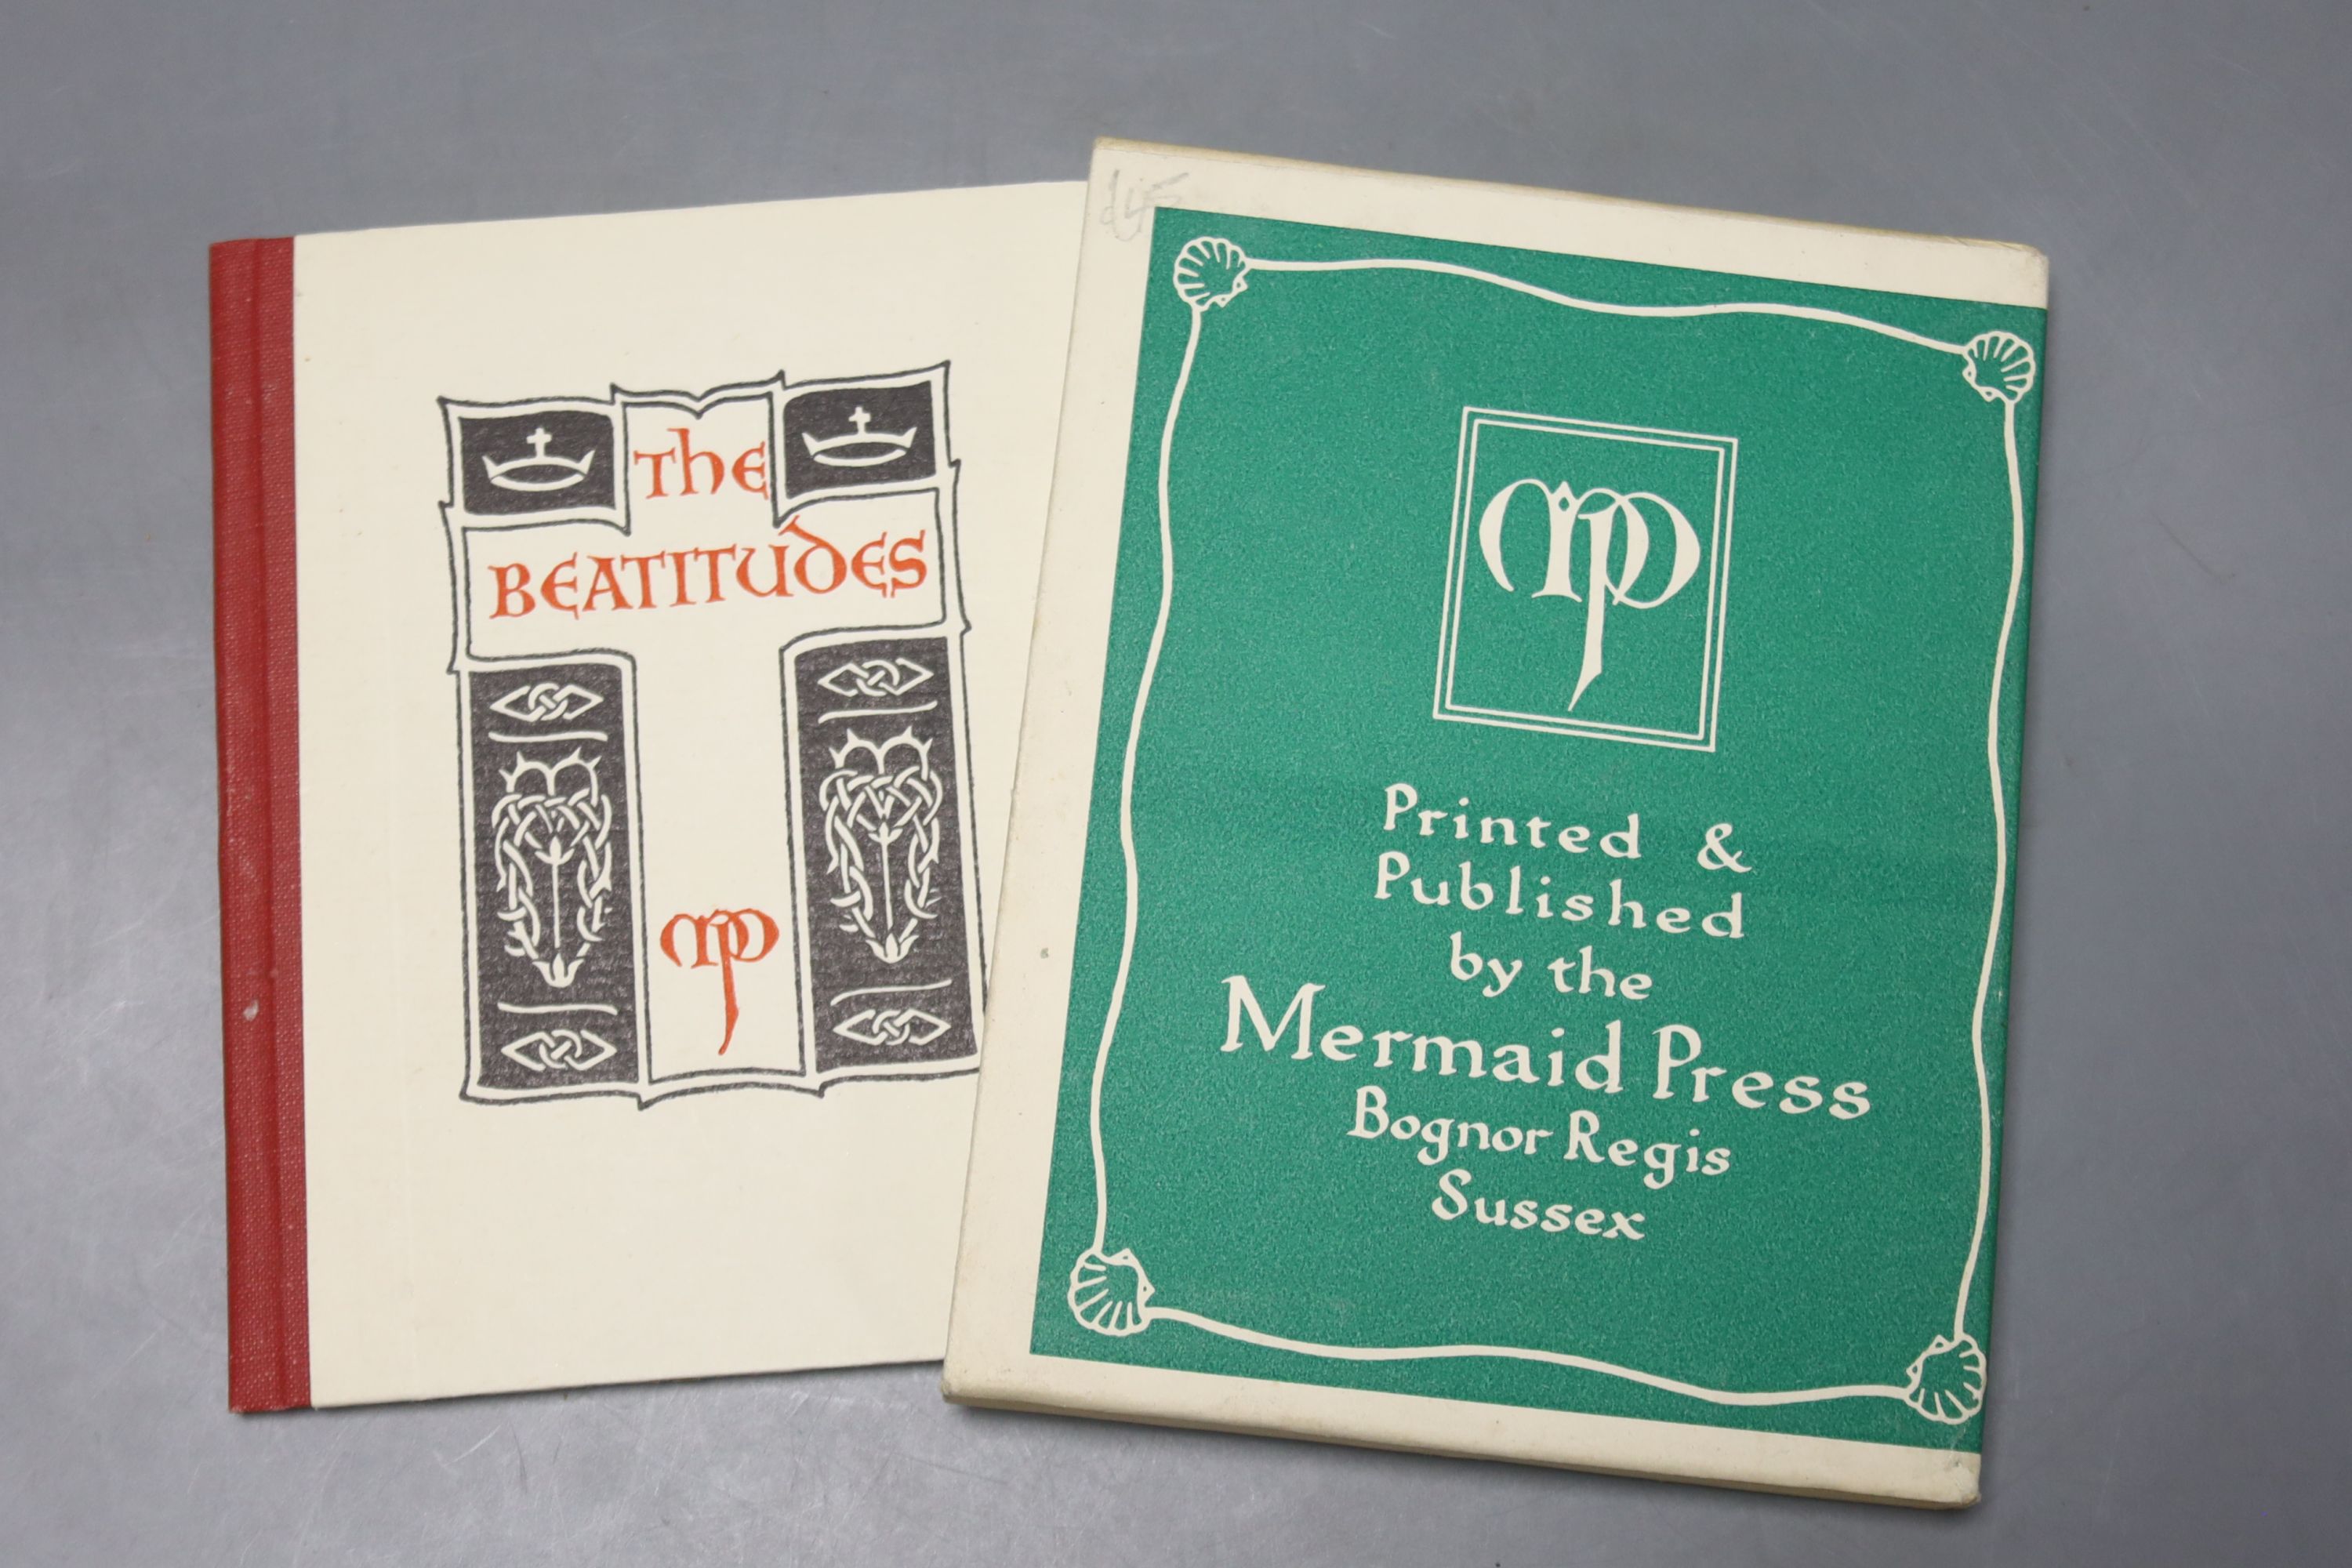 'The Beatitudes' from The Sermon on the Mount, a souvenir from the Festival of Britain 1951, 18mo, cased hardback, Mermaid Press, Bognor Regis, Sussex